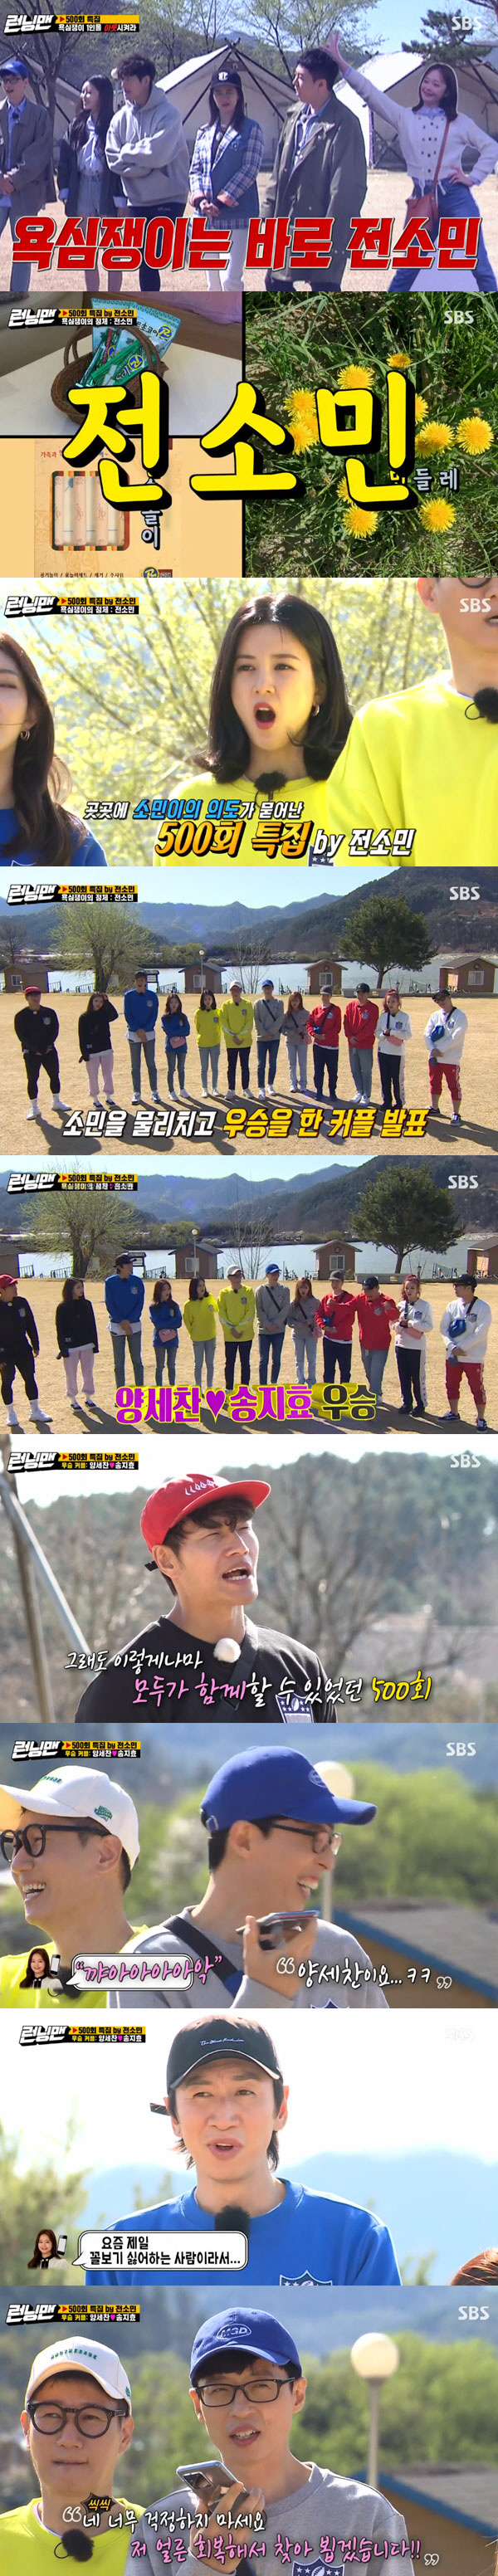 The greedy man who prepared the 500th special of Running Man was Jeon So-min.SBS Running Man, which was broadcast on the 26th, featured 500 times, with A Pink Bomi, Lantern, Chungha, Lovelys Americas and Wikimiki Yu-Jeong.On this day, Do you eat rice and run? Race, every round victory team is provided with a spring recreational set cooked by the chef. However, there is a greedy person who wants to eat the product.Members should find a greedy man in the final race and make an In-N-Out Burger.Each team will receive 100,000 won in basic allowance, and it is possible to purchase hints about greedy people by using the mission expenses hidden in each Tent.Each round winning team is provided with greedy hints and pocket money still time.The first mission was Get the quiz attached to your body, with Yoo Jae-Suk and Yu-Jeong, Ji Suk-jin and lanterns, Lee Kwang-soo and Chungha, Song Ji-hyo and Yang Se-chan, Kim Jong-kook and the Americas, Haha and Bomi teaming up.In the dance mission, they exploded with excitement, and Yoo Jae-Suk and Yu-Jeong, who won the first prize, chose Haha Tent and won 100,000 won in the Web.I also got a hint of greedy I am interested in health.The second-place Ji Suk-jin lantern won Lee Kwang-soo Tent in the Web, unfortunately 2,000 won.Kim Jong-kook Americas won Ji Suk-jin Tent Caught in the Web, 67,000 won.The second round was a mission to Save a partner with a true heart, one of the couples was seated on the conveyor belt, and the other one was confronted with five opponents.As a result, the first Haha Bomi team, the second Kim Jong-kook Americas team, and the third Lee Kwang-soo Chungha team.Haha Bomi unfortunately failed to acquire Mission Rain, but he got a greedy hint of top star.Kim Jong-kook The Americas team won 22,000 won at Yang Se-chan Tent and Lee Kwang-soo Chungha won 35,000 won at Kim Jong-kook Tent.The final round was to find a greedy one, and after searching for hidden hints, a couple who ripped off the greedy name tag will win the final victory, but once every five minutes, the greedy night comes.All members will be temporarily suspended with their eye bandages on, and only greedy will move in one by one in the order set by greedy.If you mislead a general member, not a greedy person, the torn member is In-N-Out Burger, and immediately the night of greedy comes.The members who found the hint came to the first greedy night with Kim Jong-kook suspected as a greedy.The first target of greedy Lee Kwang-soo was the first to be In-N-Out Burger.The greedys second target was Lee Mi-ju, when Bomi removed Kim Jong-kooks name tag and Kim Jong-kook was not greedy.With the greedy third target Song Ji-hyo in-N-Out Burger, the most likely suspect was Yoo Jae-Suk as Kim Jong-kooks In-N-Out Burger.So the lantern removed the name tag of Yoo Jae-Suk, and Yoo Jae-Suk was not a greedy person either.The current survivors were Haha, Yang Se-chan, lanterns and Bomi, with Yu-Jeong and Chungha being In-N-Out Burger.At that time, the surviving members revealed that the greedy person was Jeon So-min through the hints they obtained.Yang Se-chan, who later realized that the safe secret number was Jeon So-mins birthday, opened the safe, and Yang Se-chan and Song Ji-hyo won the championship.The members called Jeon So-min, who laughed when asked why the first was male.Then, Jeon So-min said, Do not worry too much, I will recover quickly and find you.